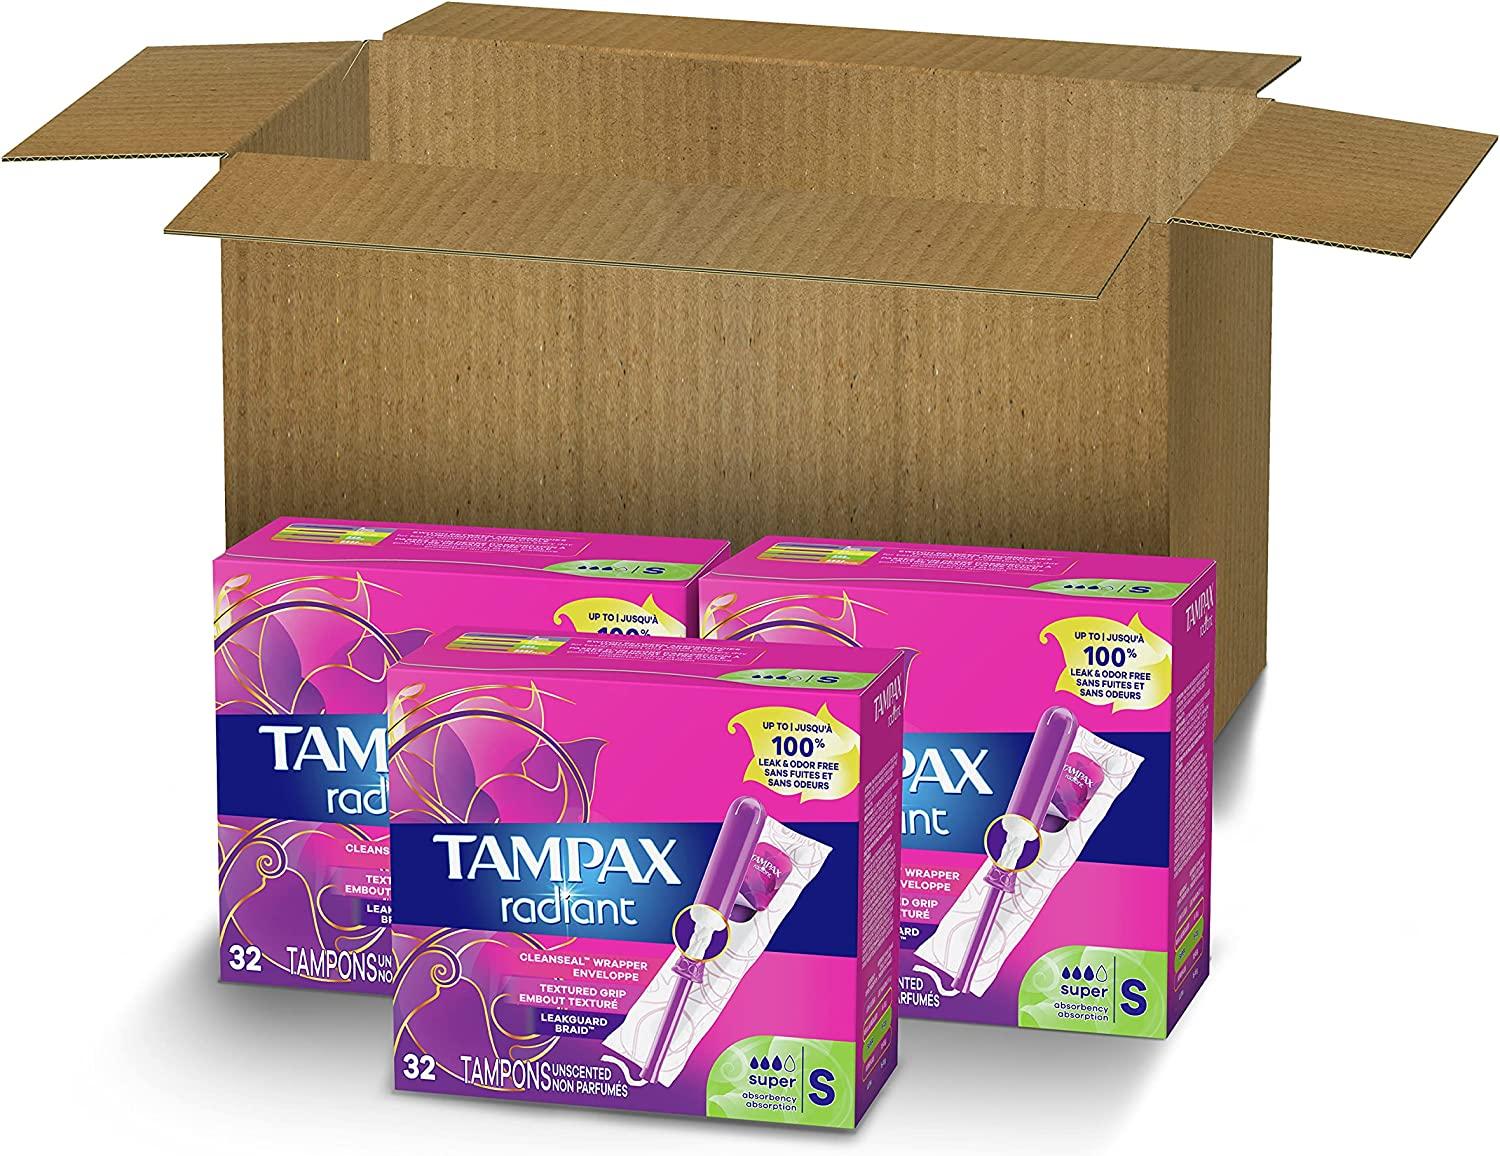 Tampax Radiant Tampons Super Absorbency, 96 Count, BPA Free